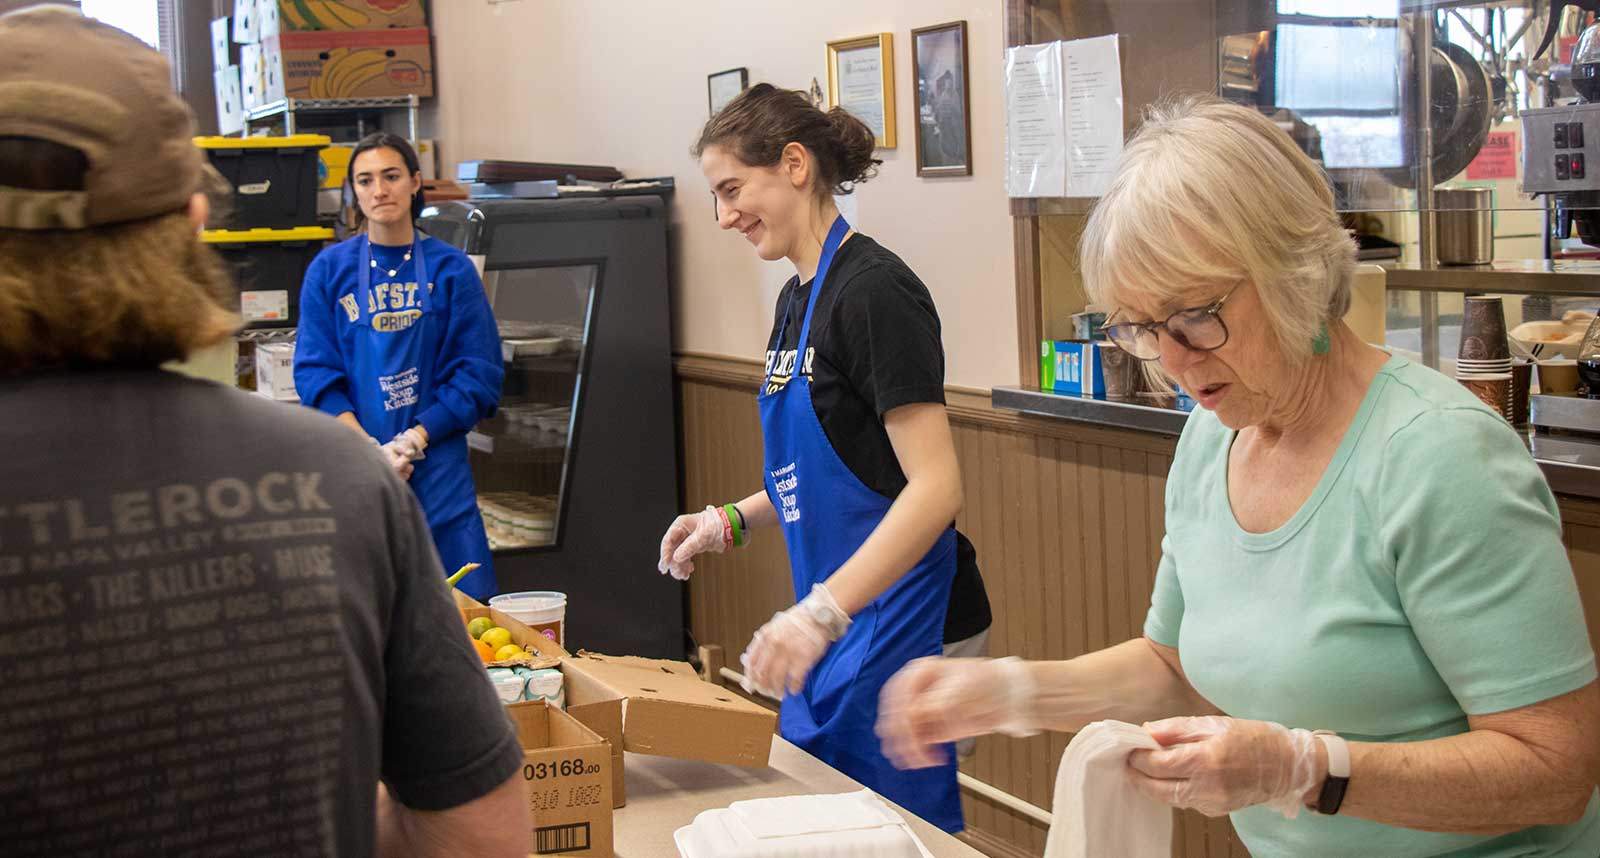 Volunteers serve the hungry